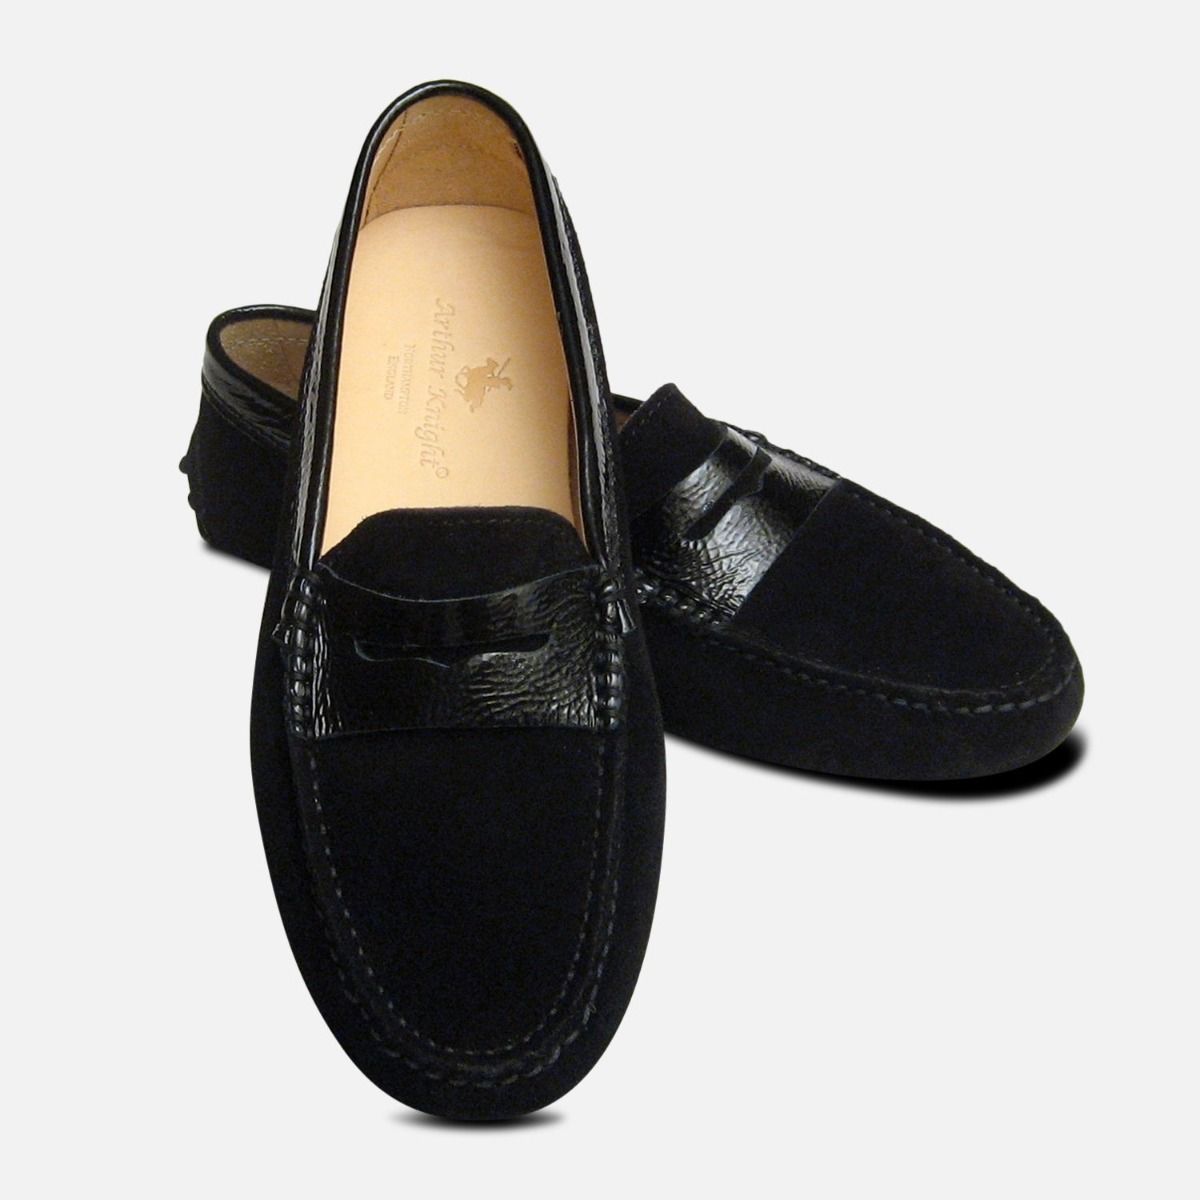 Black Suede & Crinkle Patent Arthur Knight Ladies Italian Driving Shoes 